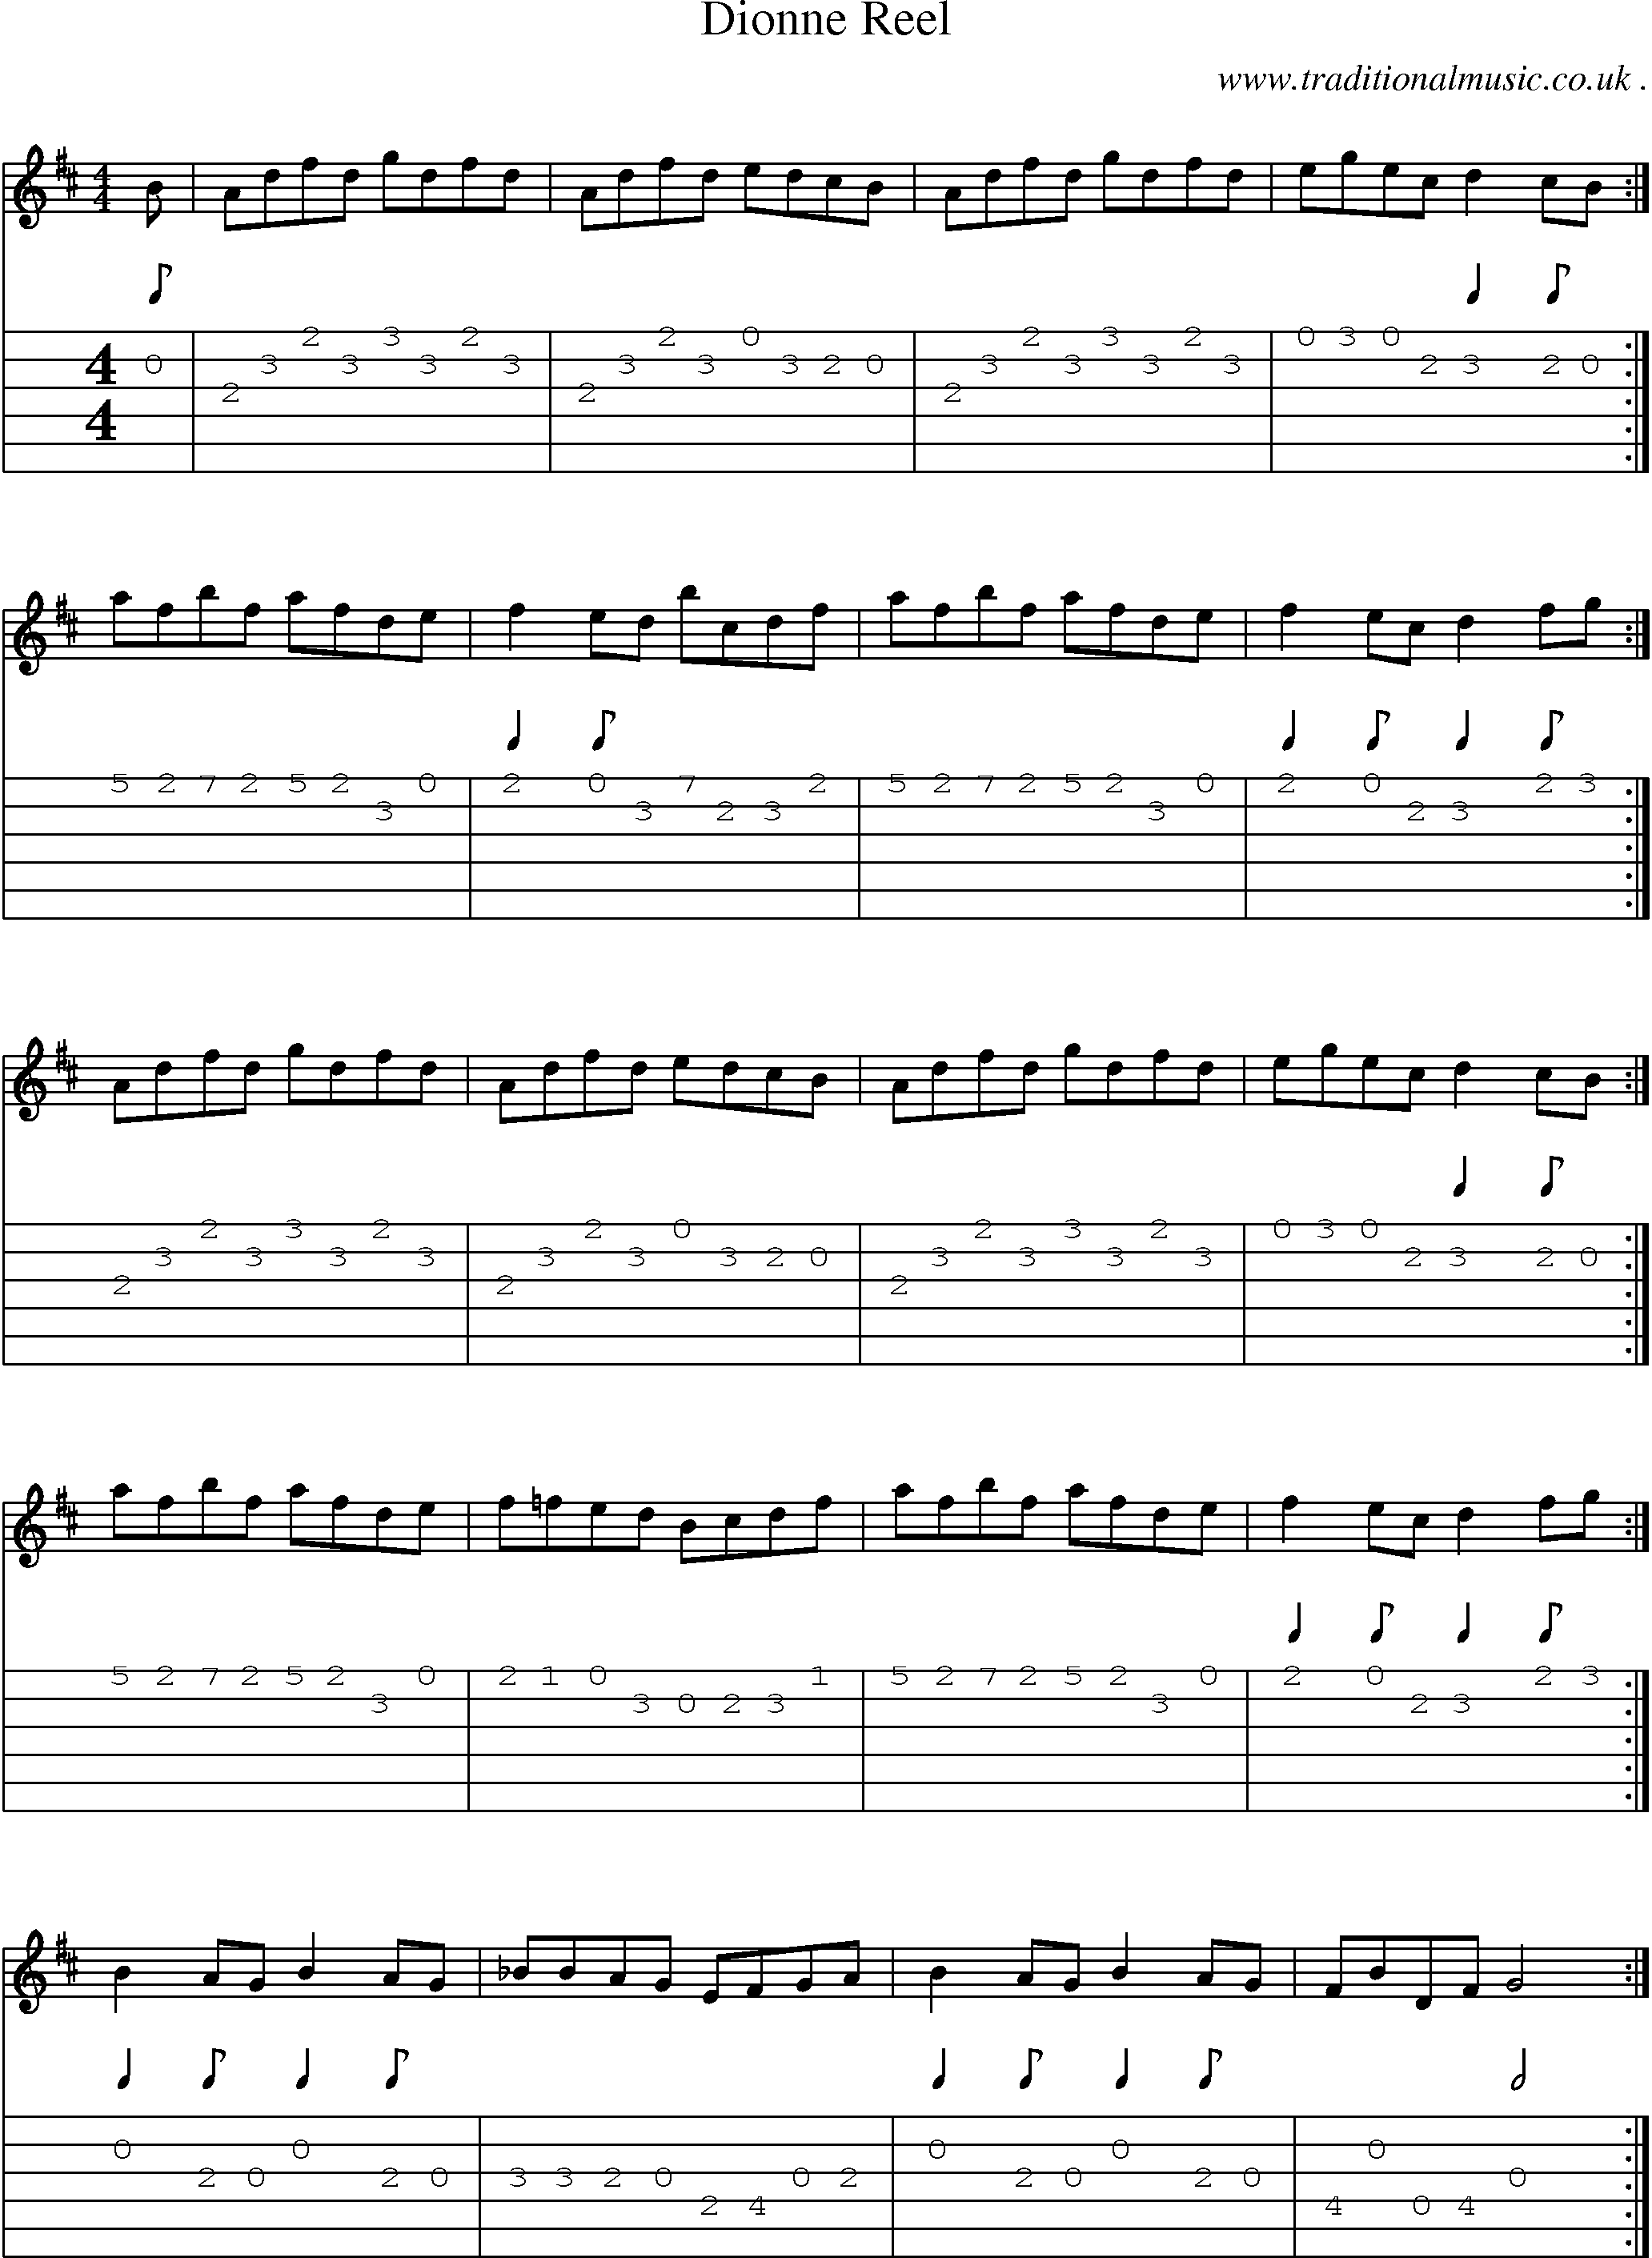 Sheet-Music and Guitar Tabs for Dionne Reel